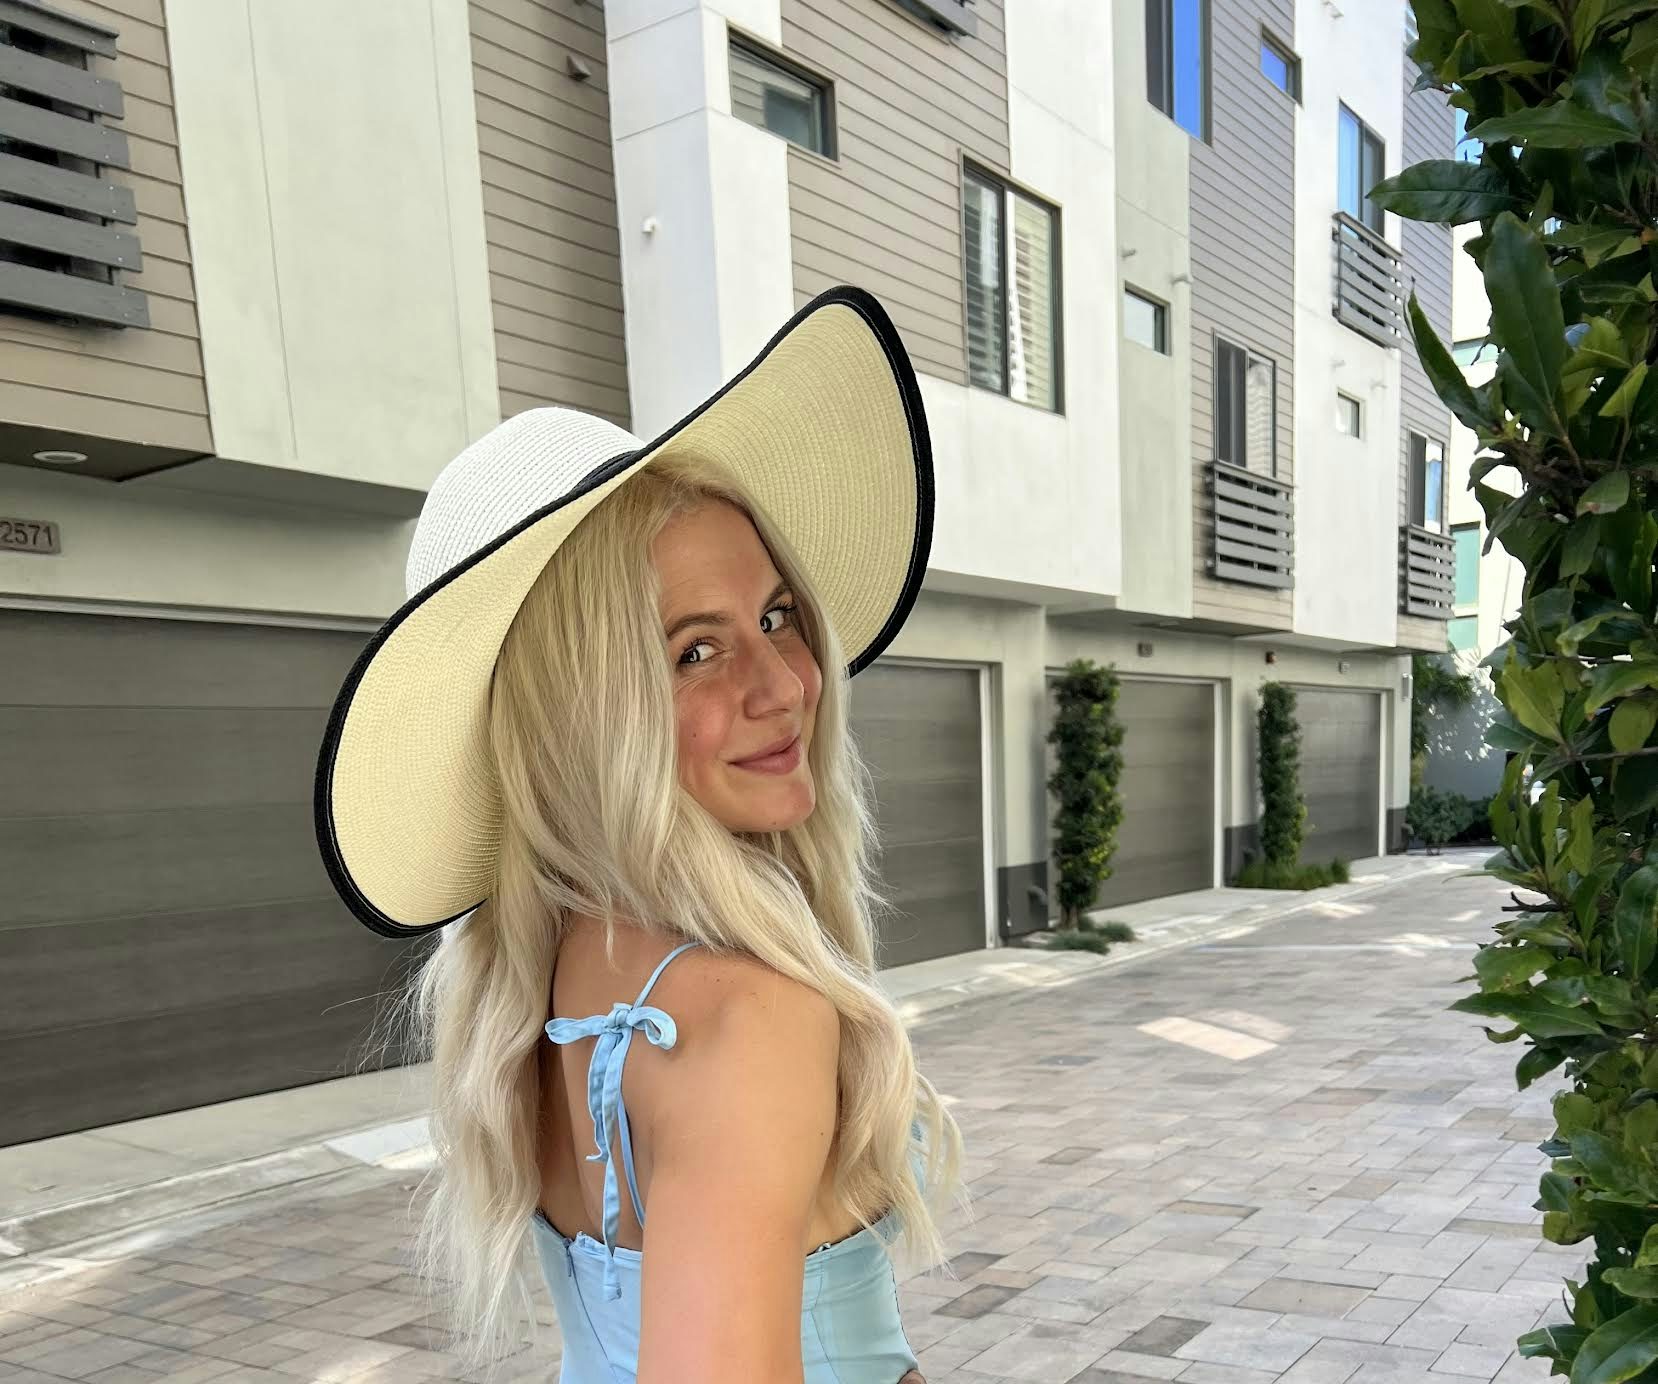 Travel advisor Maddy Mazzeo wears a blue dress and large brim sun hat on a quiet city street